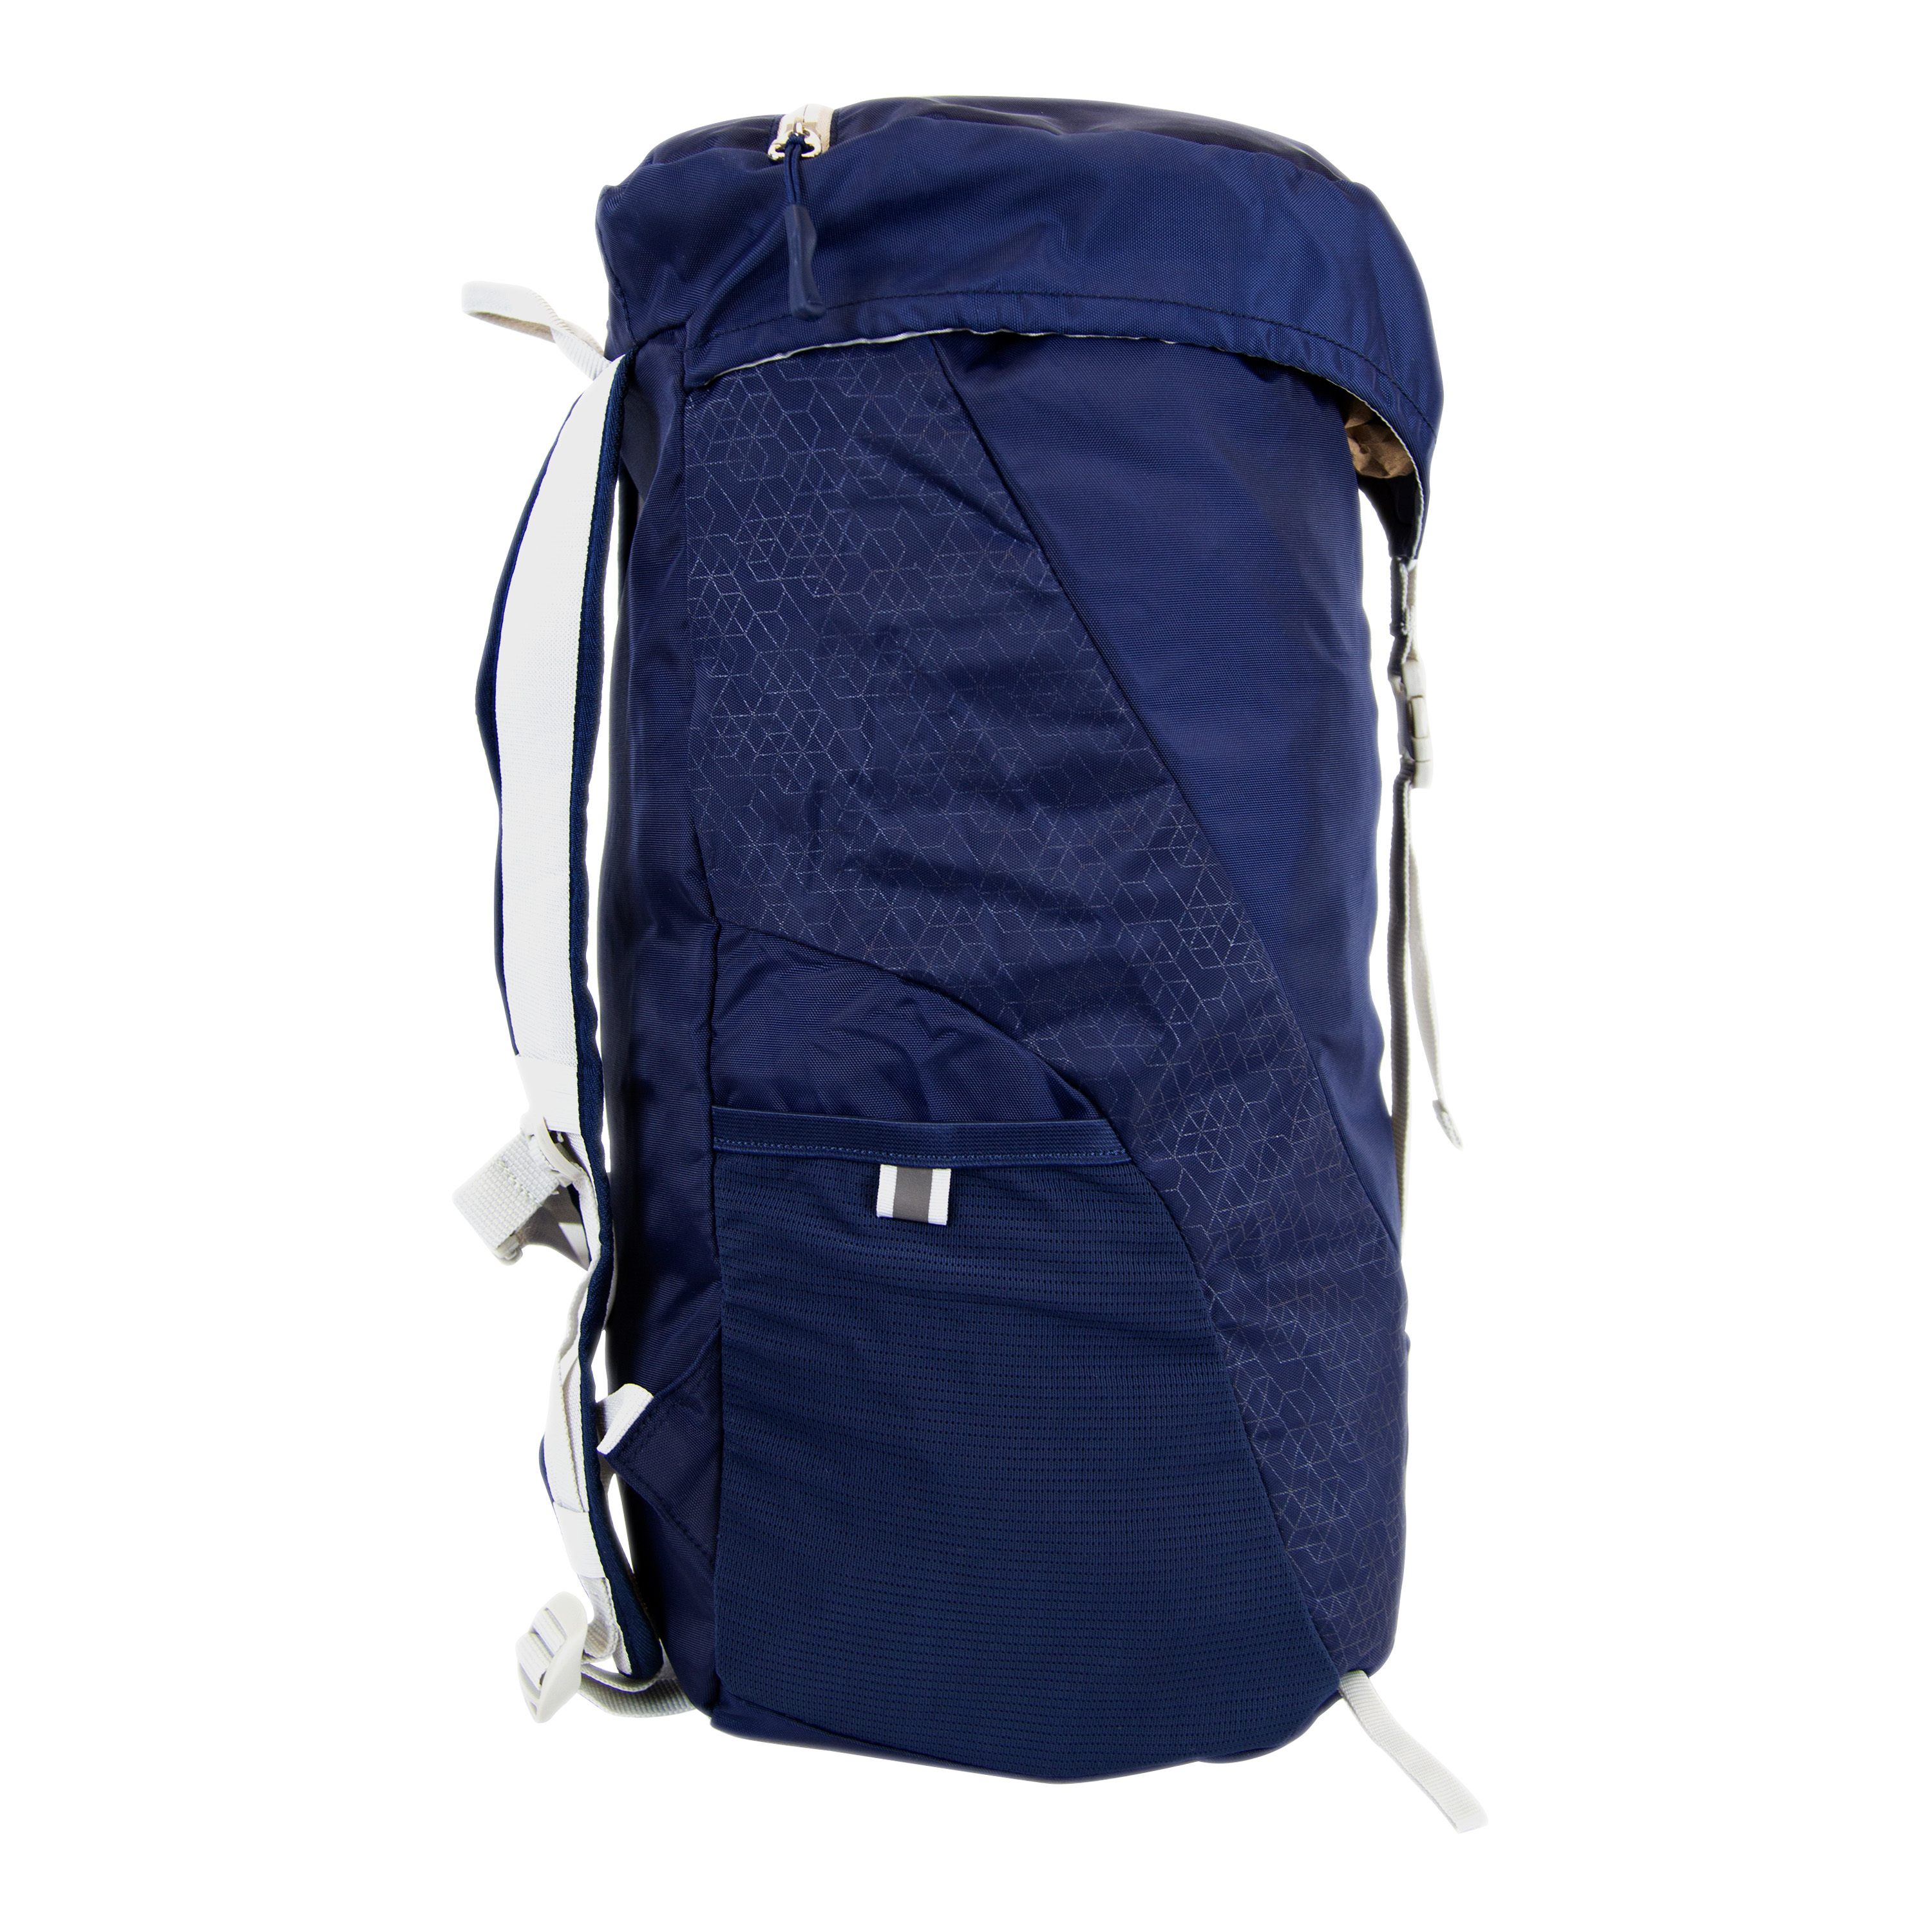 Ozark Trail 28L Gainesville Lightweight Packable Backpack, Hydration Compatible - image 7 of 8